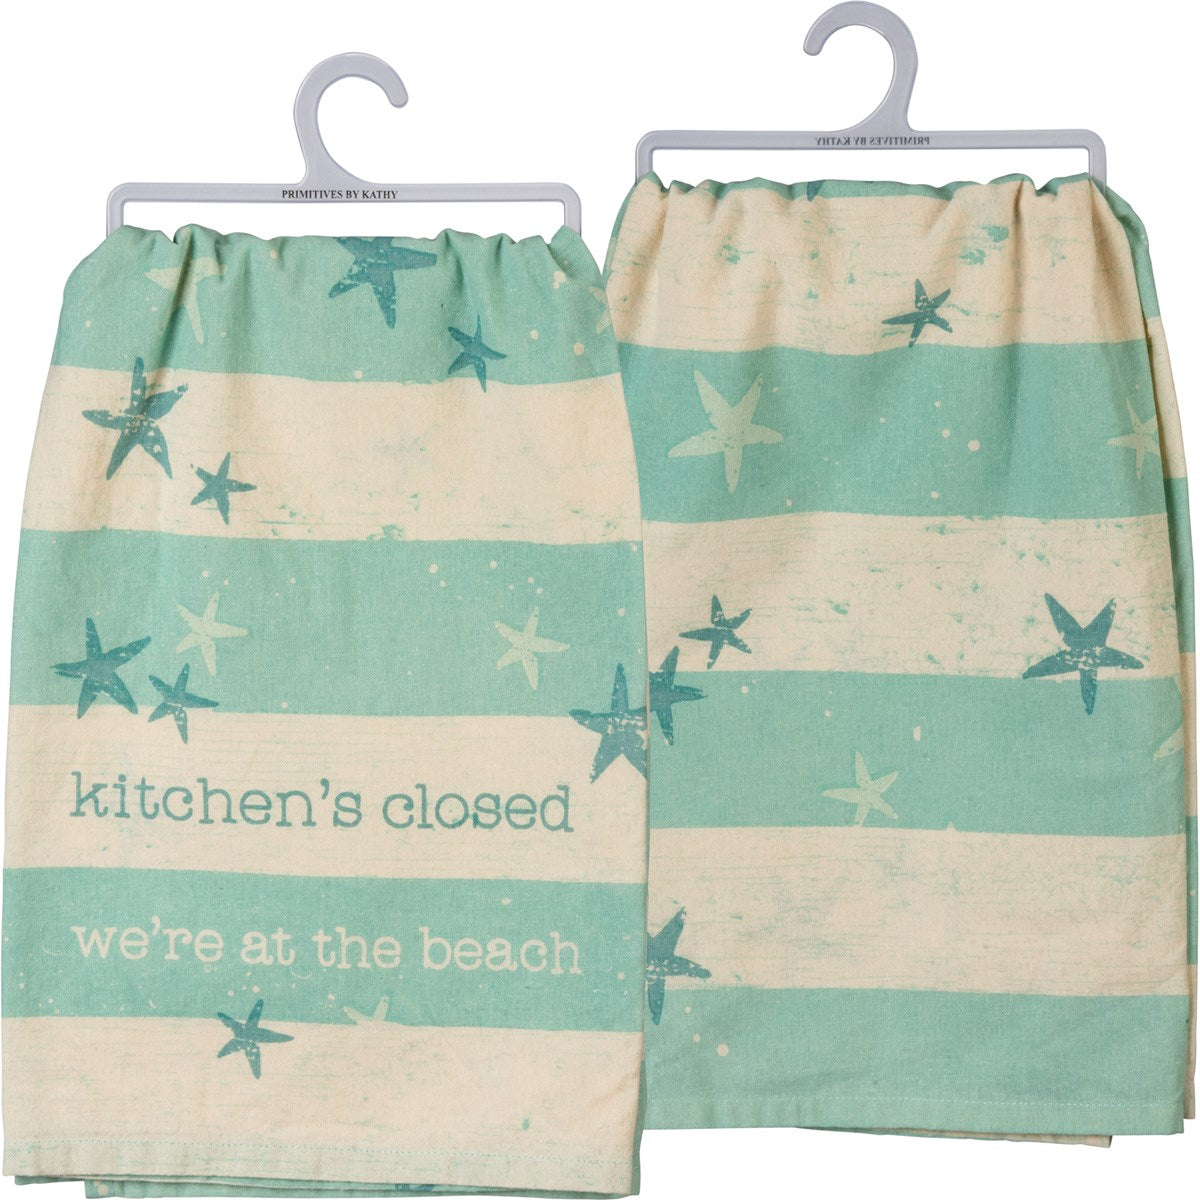 At the Beach - Kitchen Towel